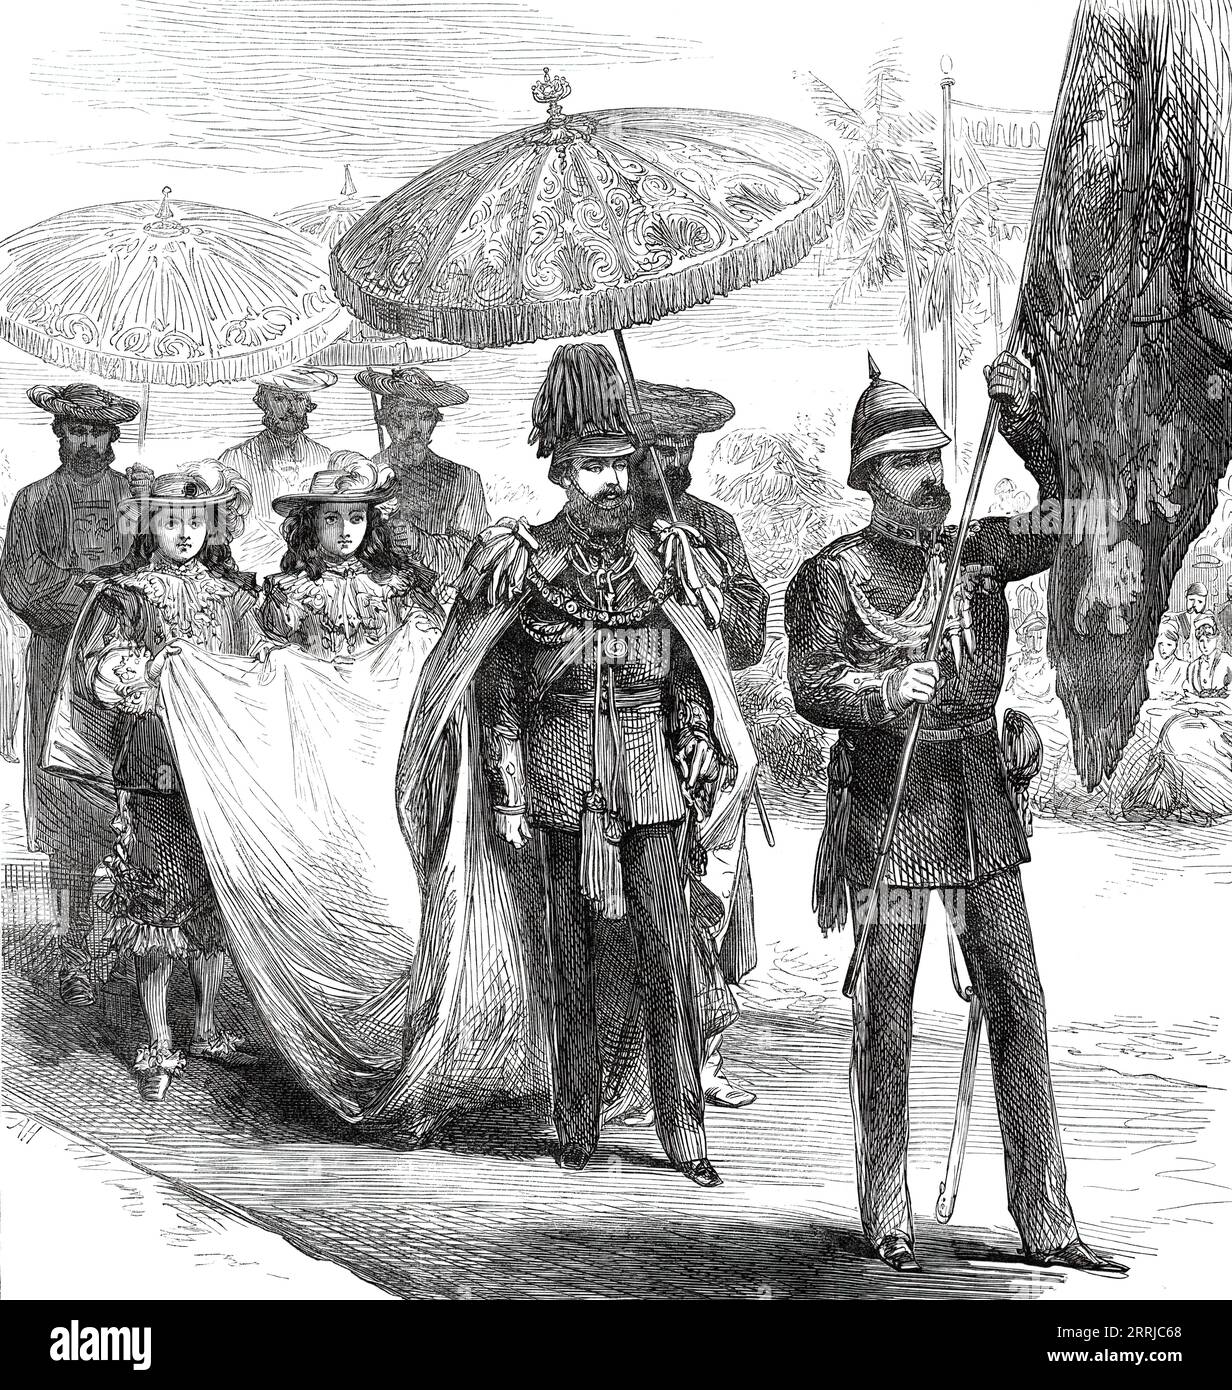 The Grand Chapter of the Star of India at Calcutta: the Prince of Wales passing from his tent to the Grand Chapter Tent, from a sketch by one of our special artists, 1876. The future King Edward VII in India. 'The Prince was in field-marshal's uniform, with a white helmet and plume...The standard-bearer walks a few paces before his Royal Highness...His train was carried by Messrs. Grimston and Walshe, naval cadets...attired in the costume of pages at the Court of Charles II...cavalier hats and cloaks, tunics, trunk hose, and rosetted shoes, all of blue satin. They wore cavalier wigs'. From &qu Stock Photo